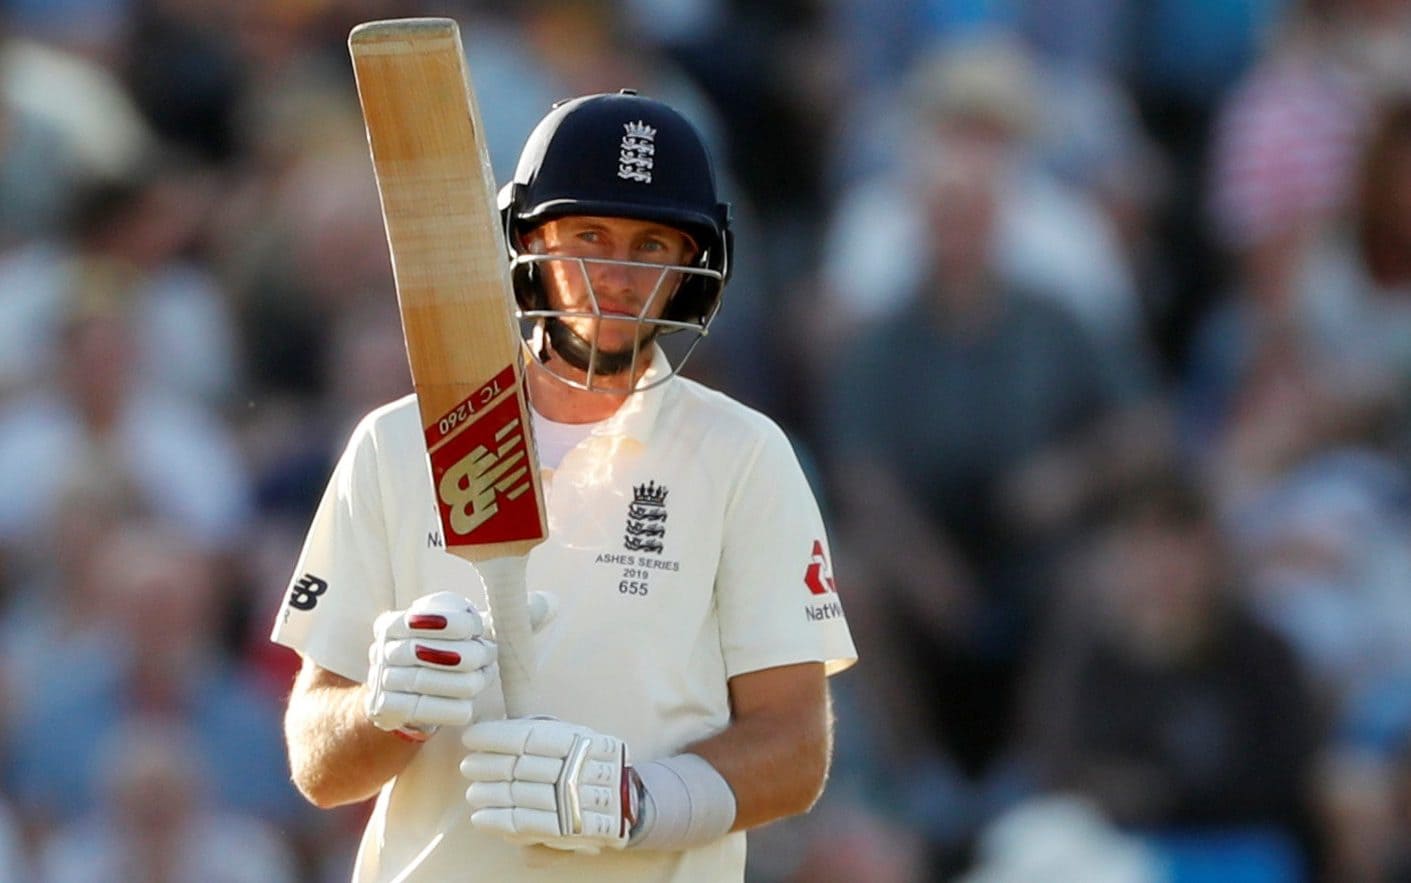 Twitter reacts to third umpire ruling Root ‘not out’ despite latter confessing to Stokes that he ‘did not hit it’